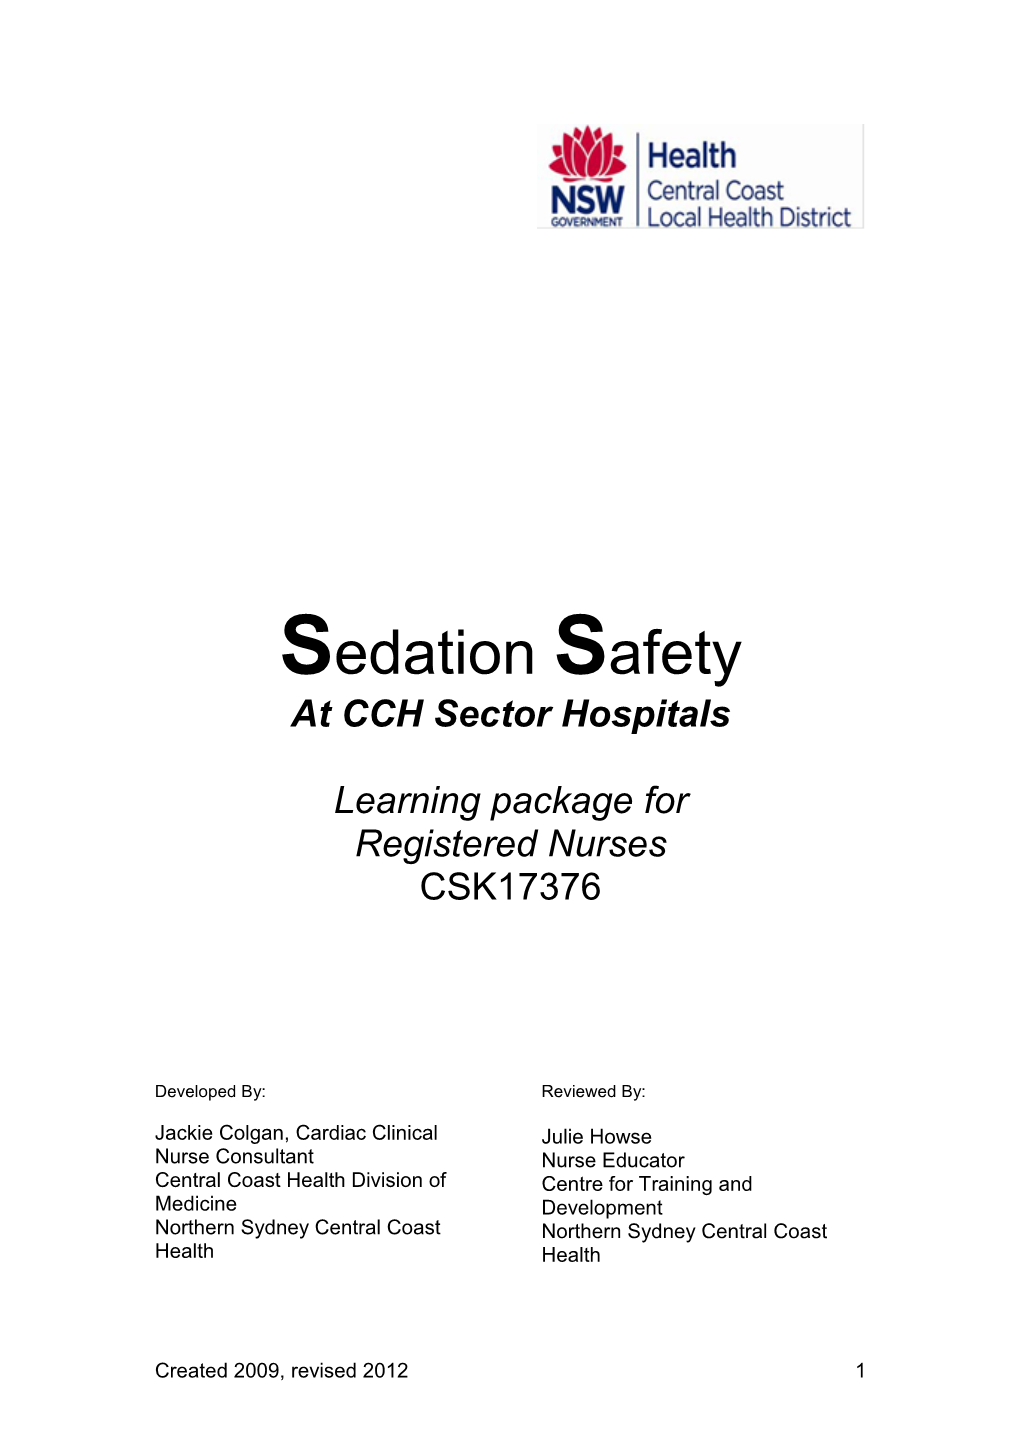 Sedation Safety at CCH Sector Hospitals